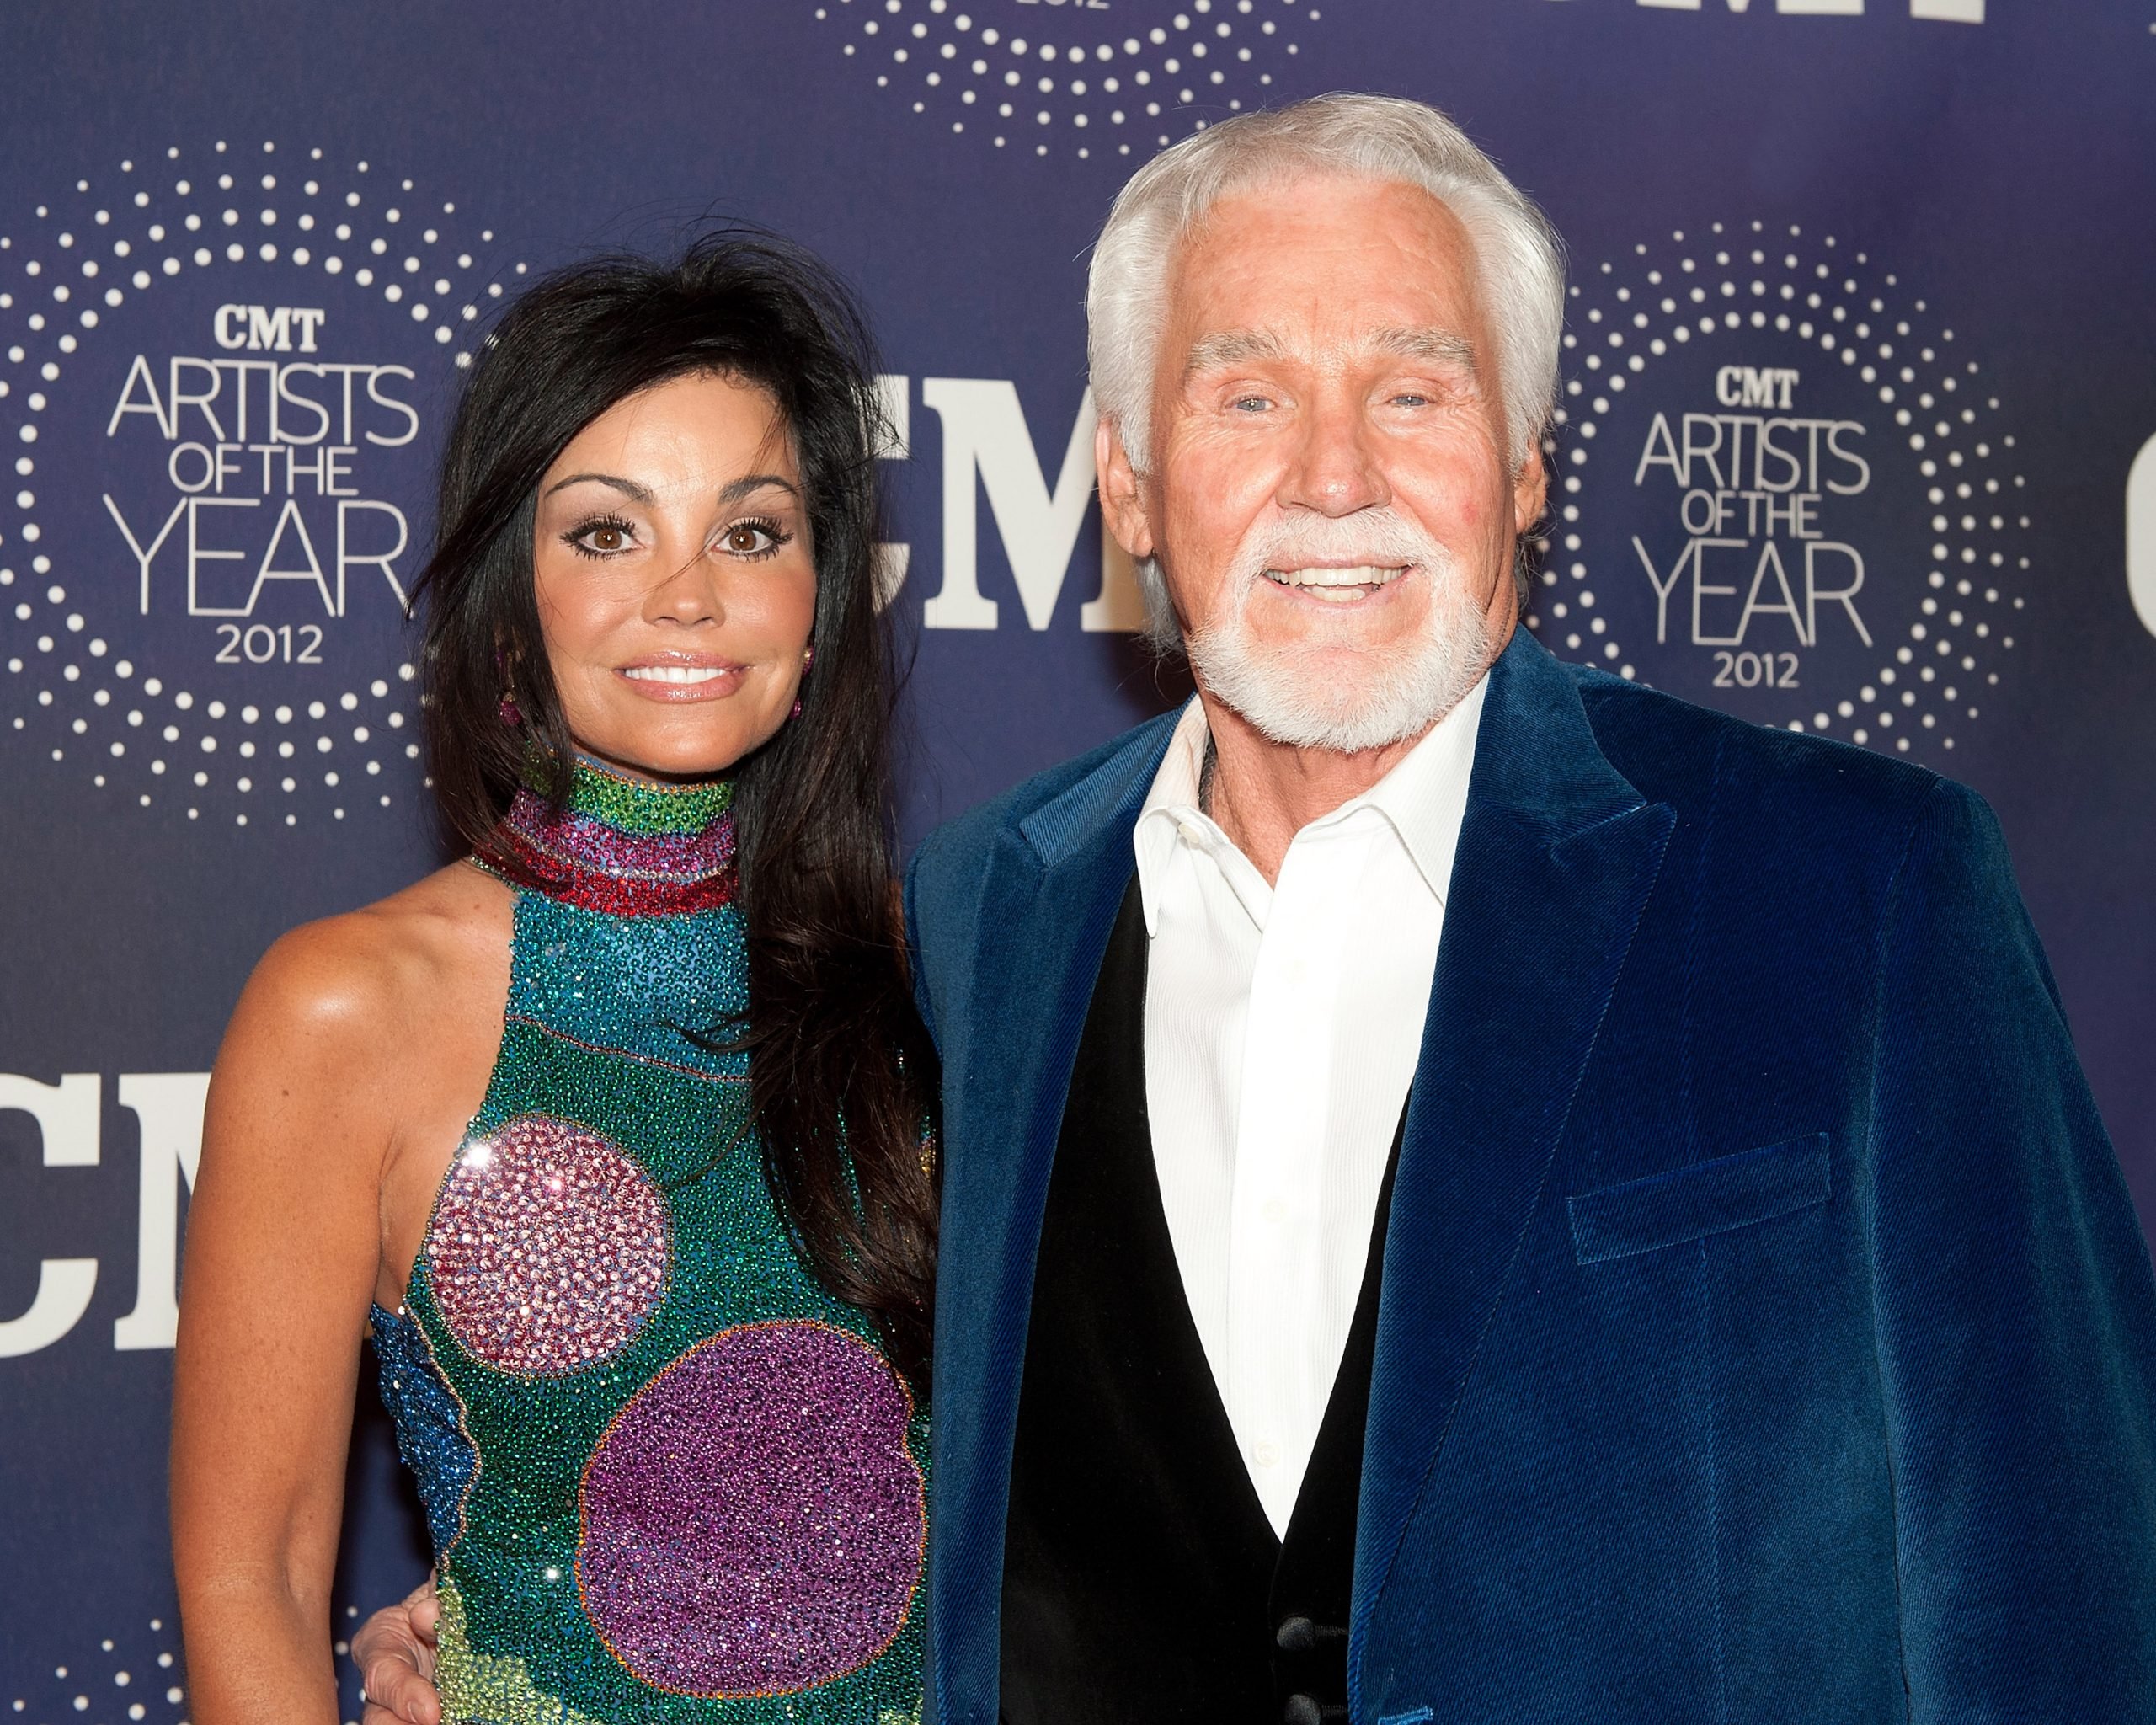 Kenny Rogers with his wife Wanda Miller in 2012